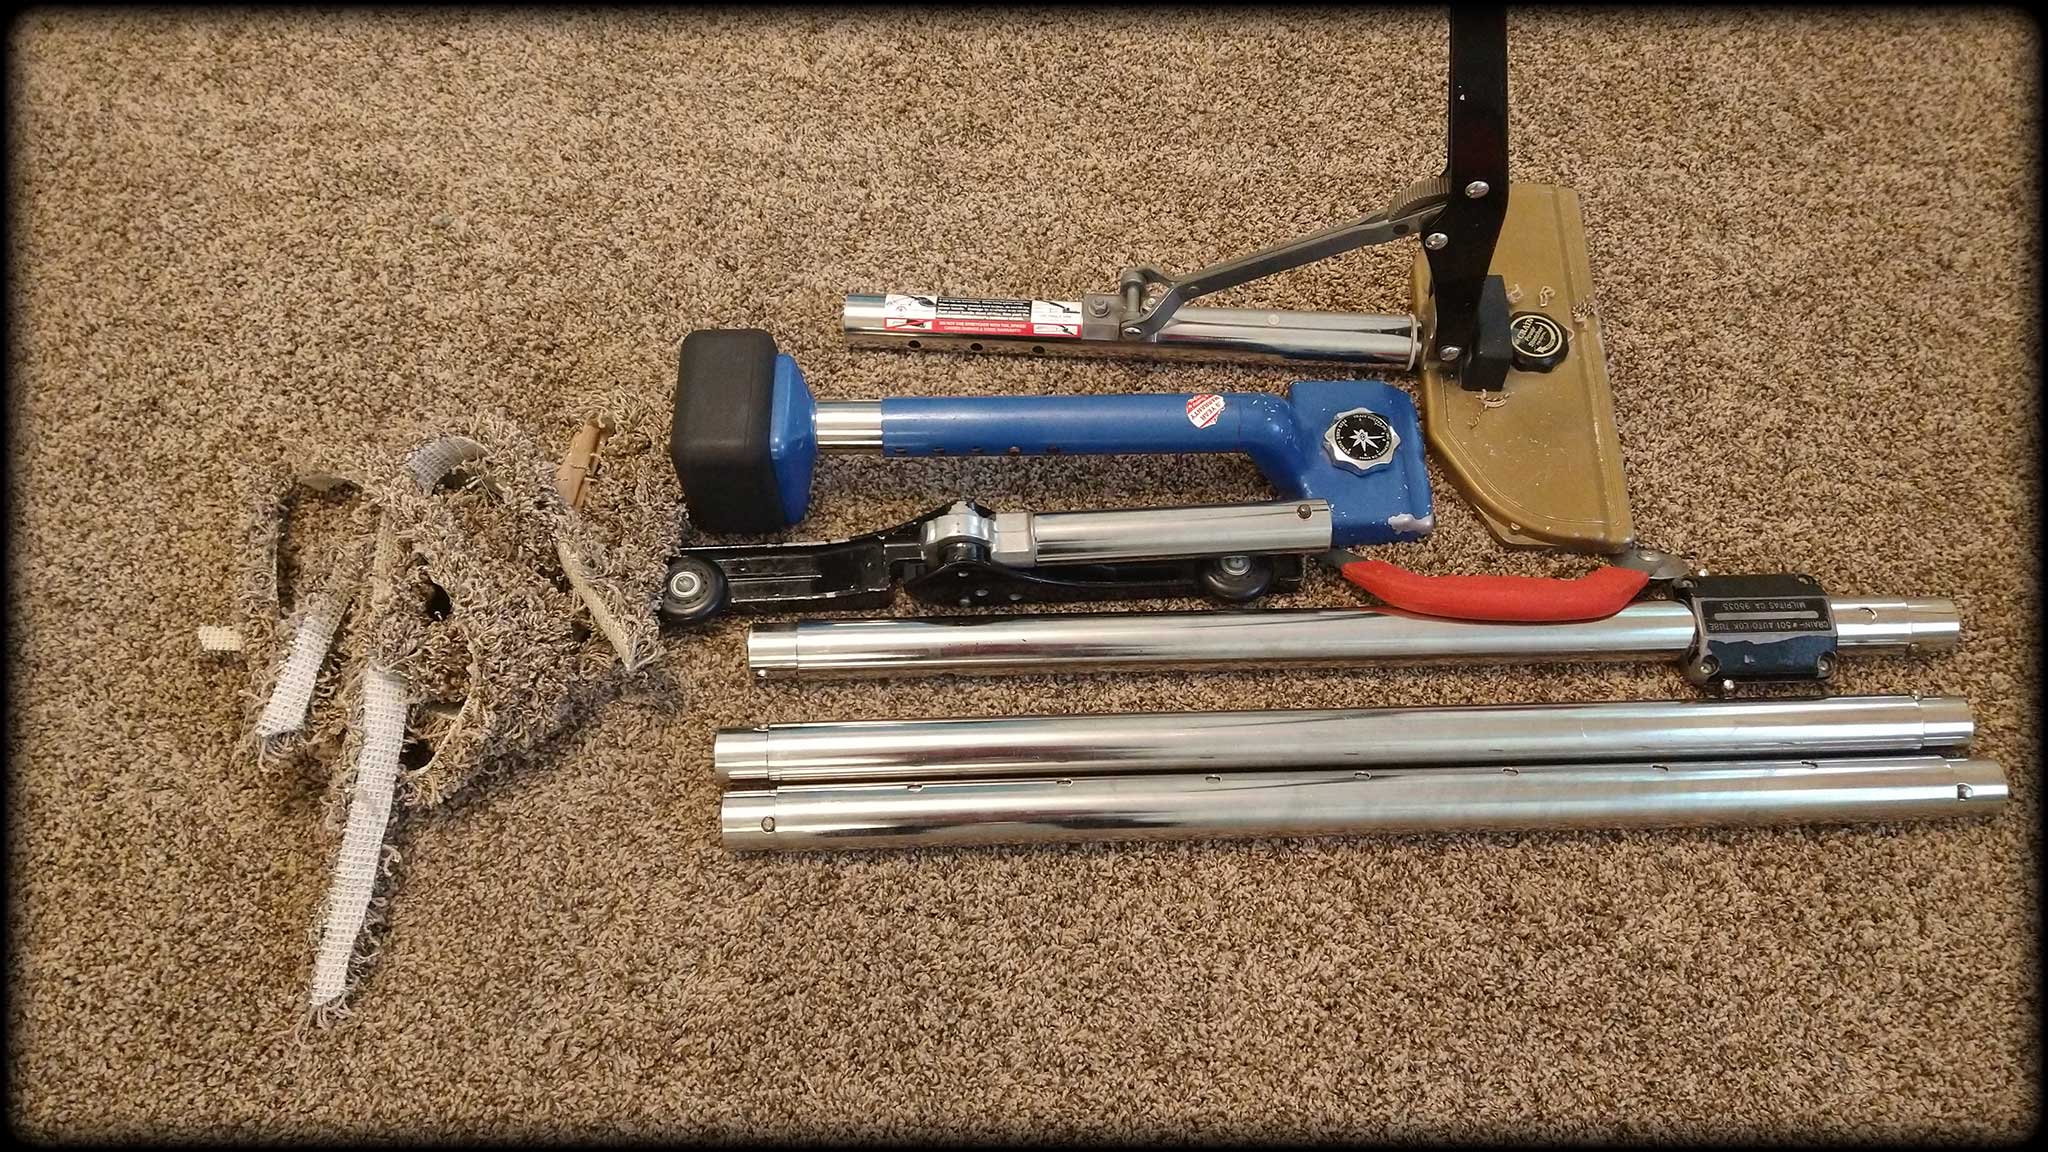 How to Smooth Carpet Ripples Without Stretching Tools